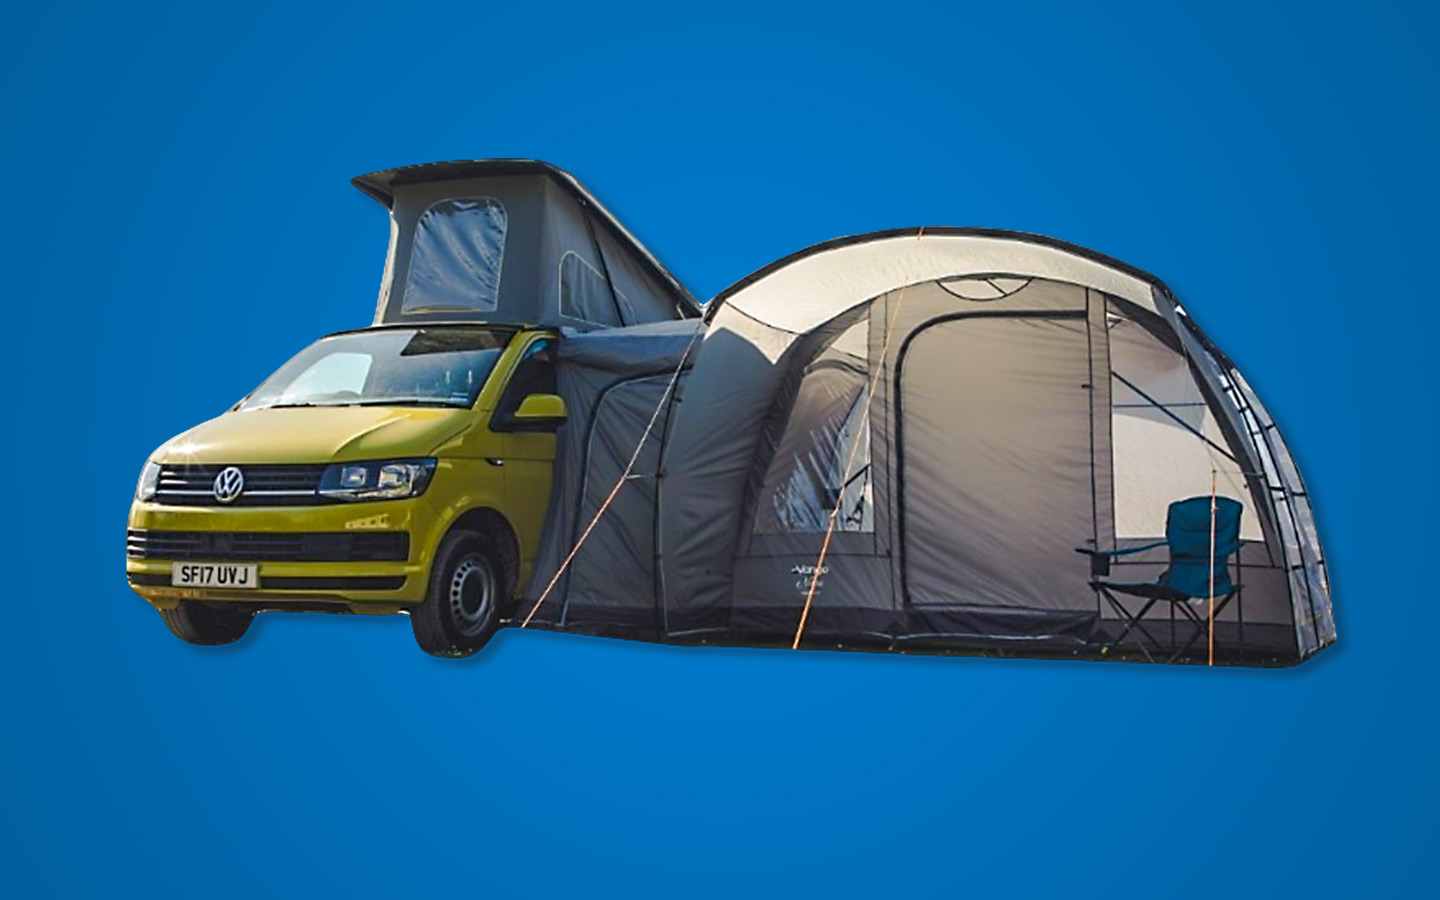 The Best Campervan Driveaway Awning